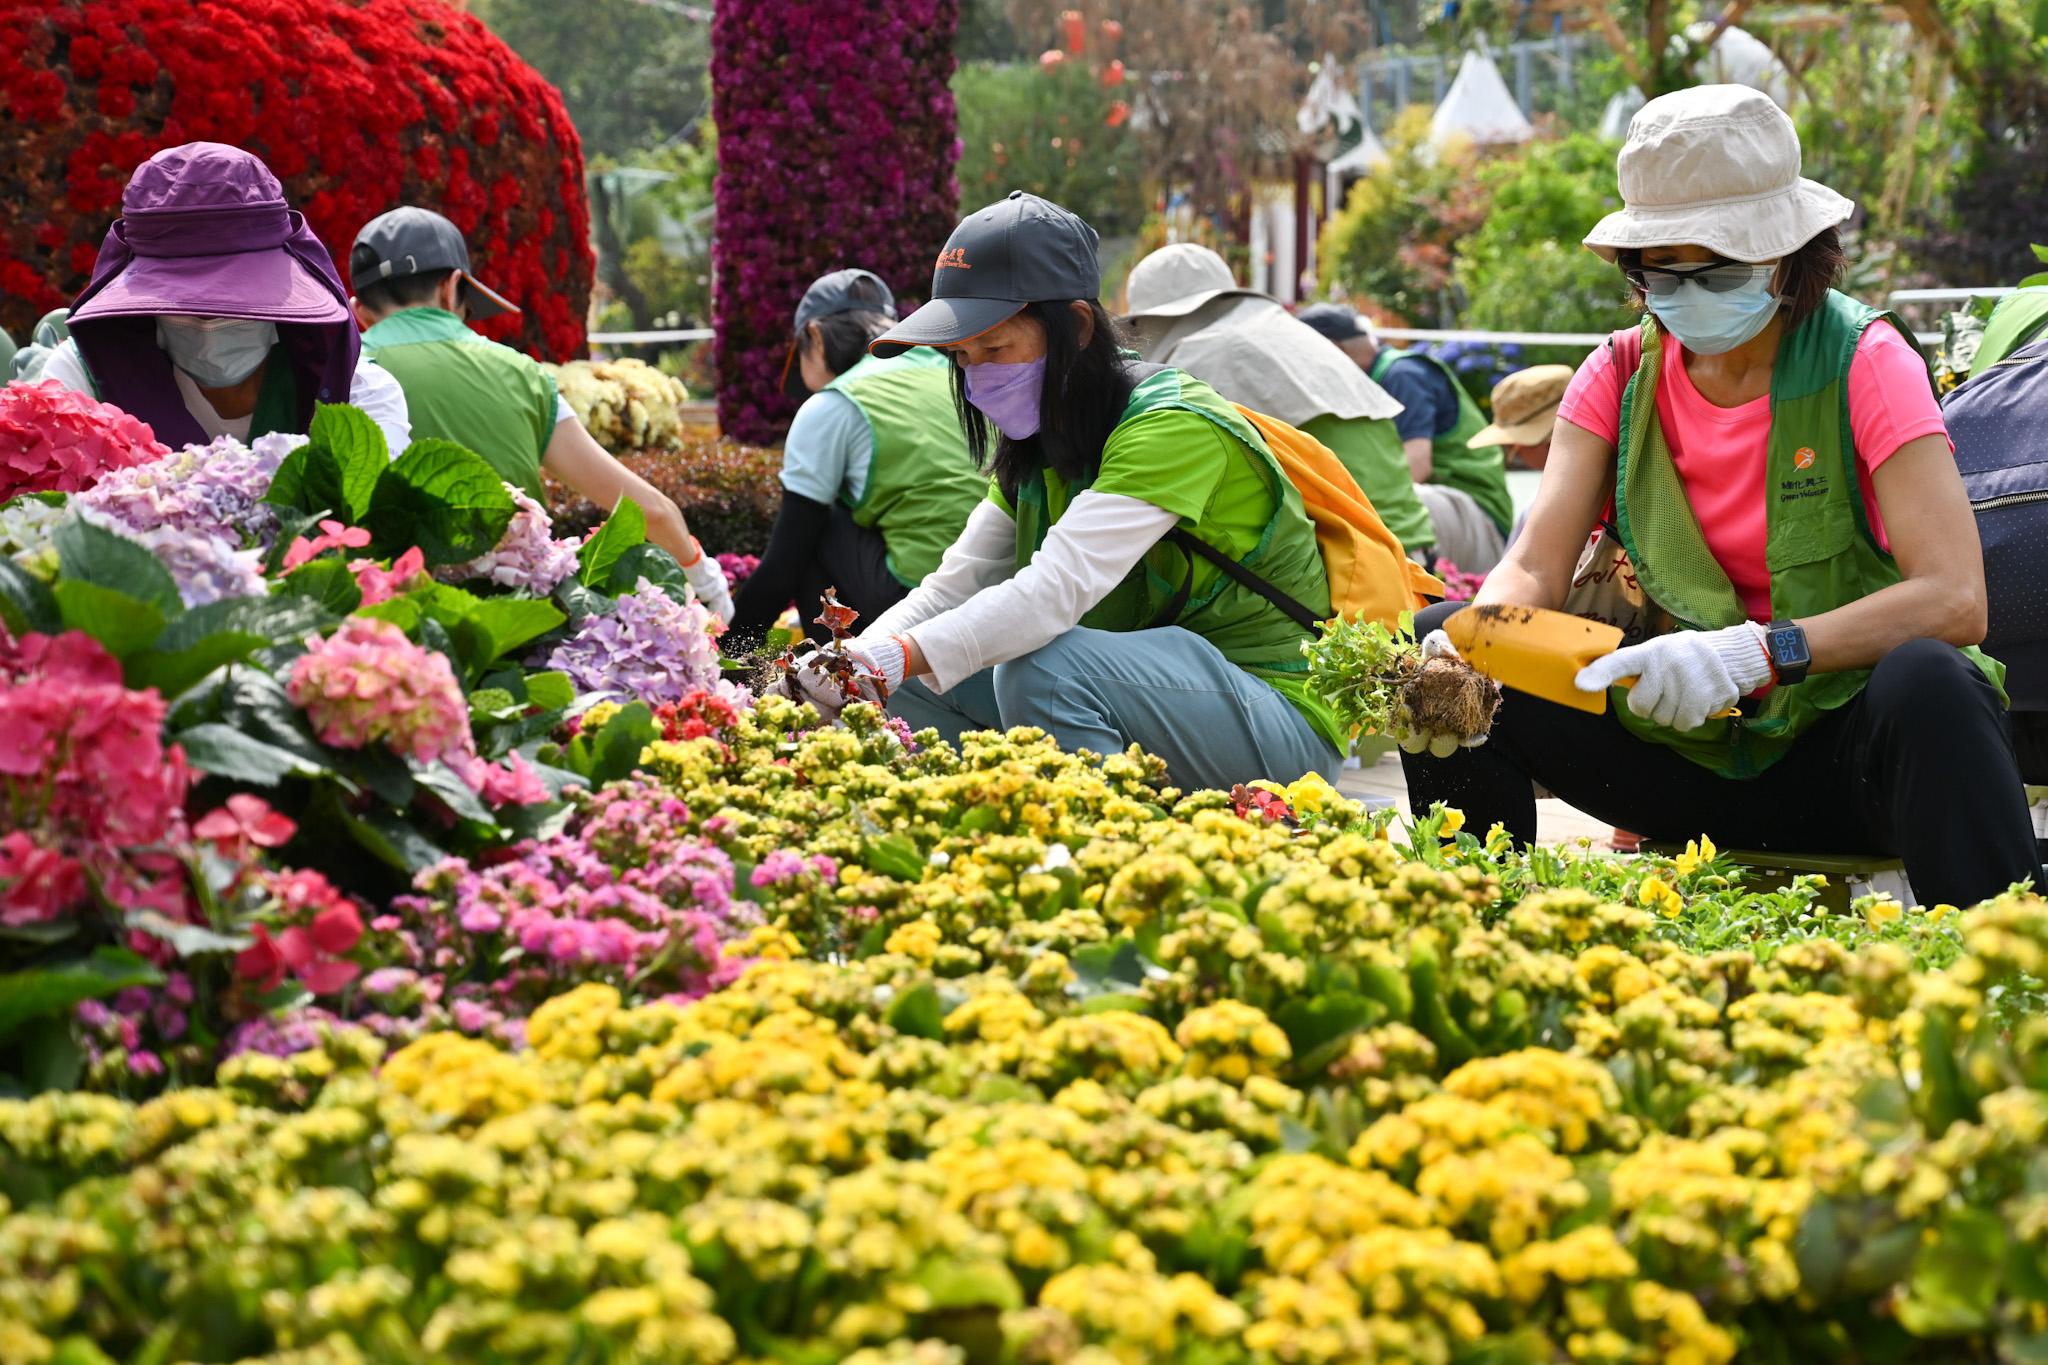 The Leisure and Cultural Services Department is once again holding Green Recycling Day (GRD) activities upon the conclusion of the Hong Kong Flower Show. The GRD activities were held today (March 25) and will continue tomorrow (March 26) at Victoria Park to reinforce green measures and reduce waste. Photo shows volunteers helping classify and collect flowers at the showground.
